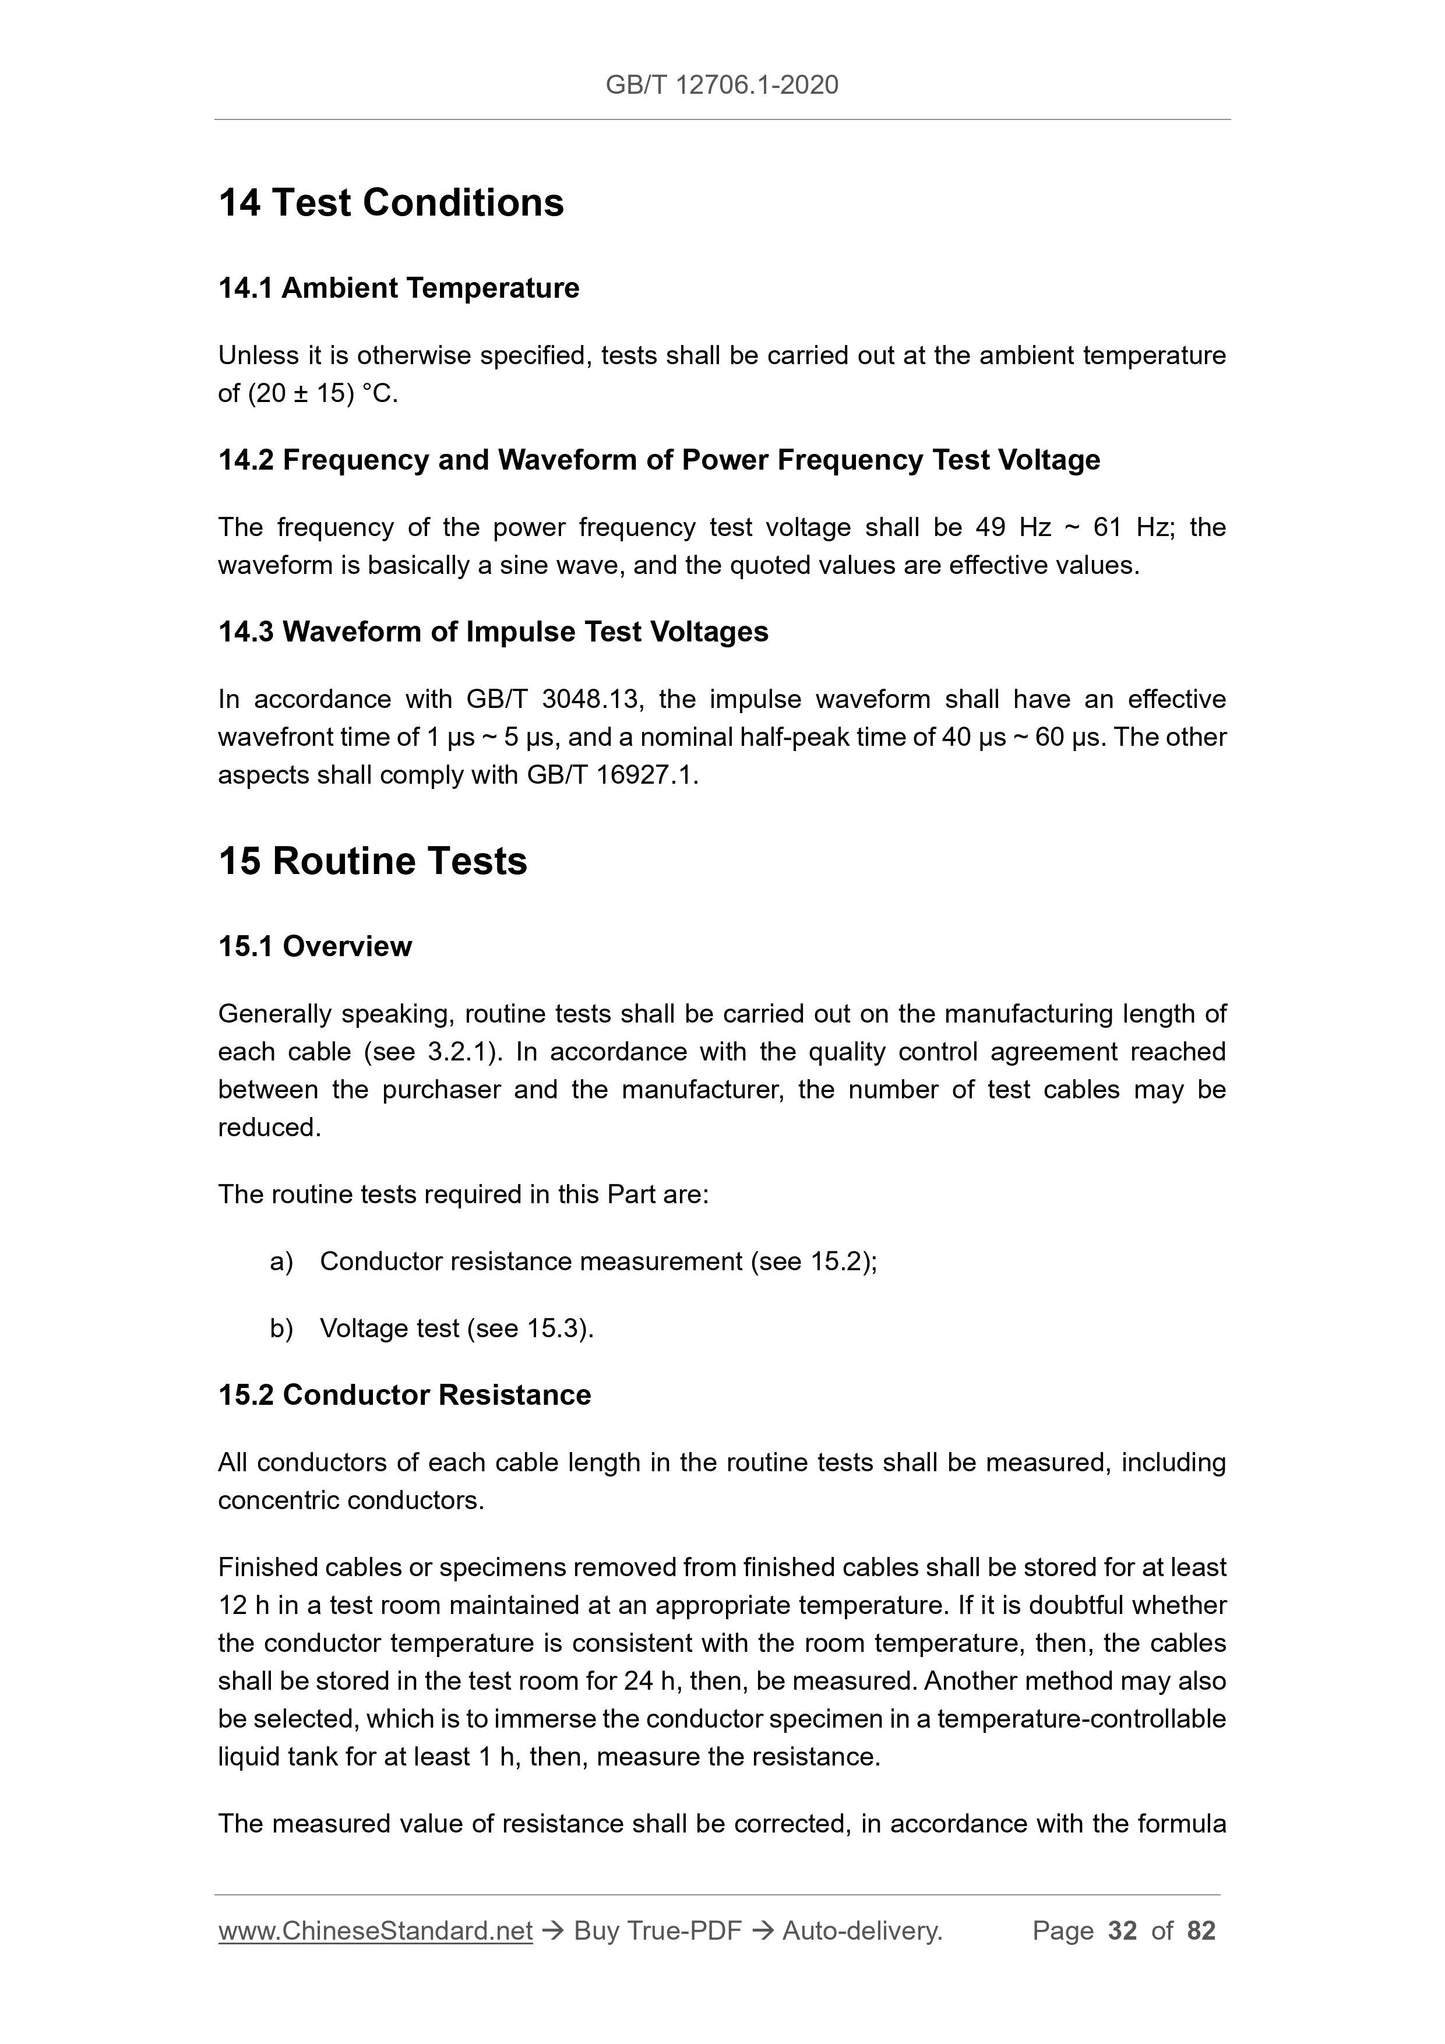 GB/T 12706.1-2020 Page 11